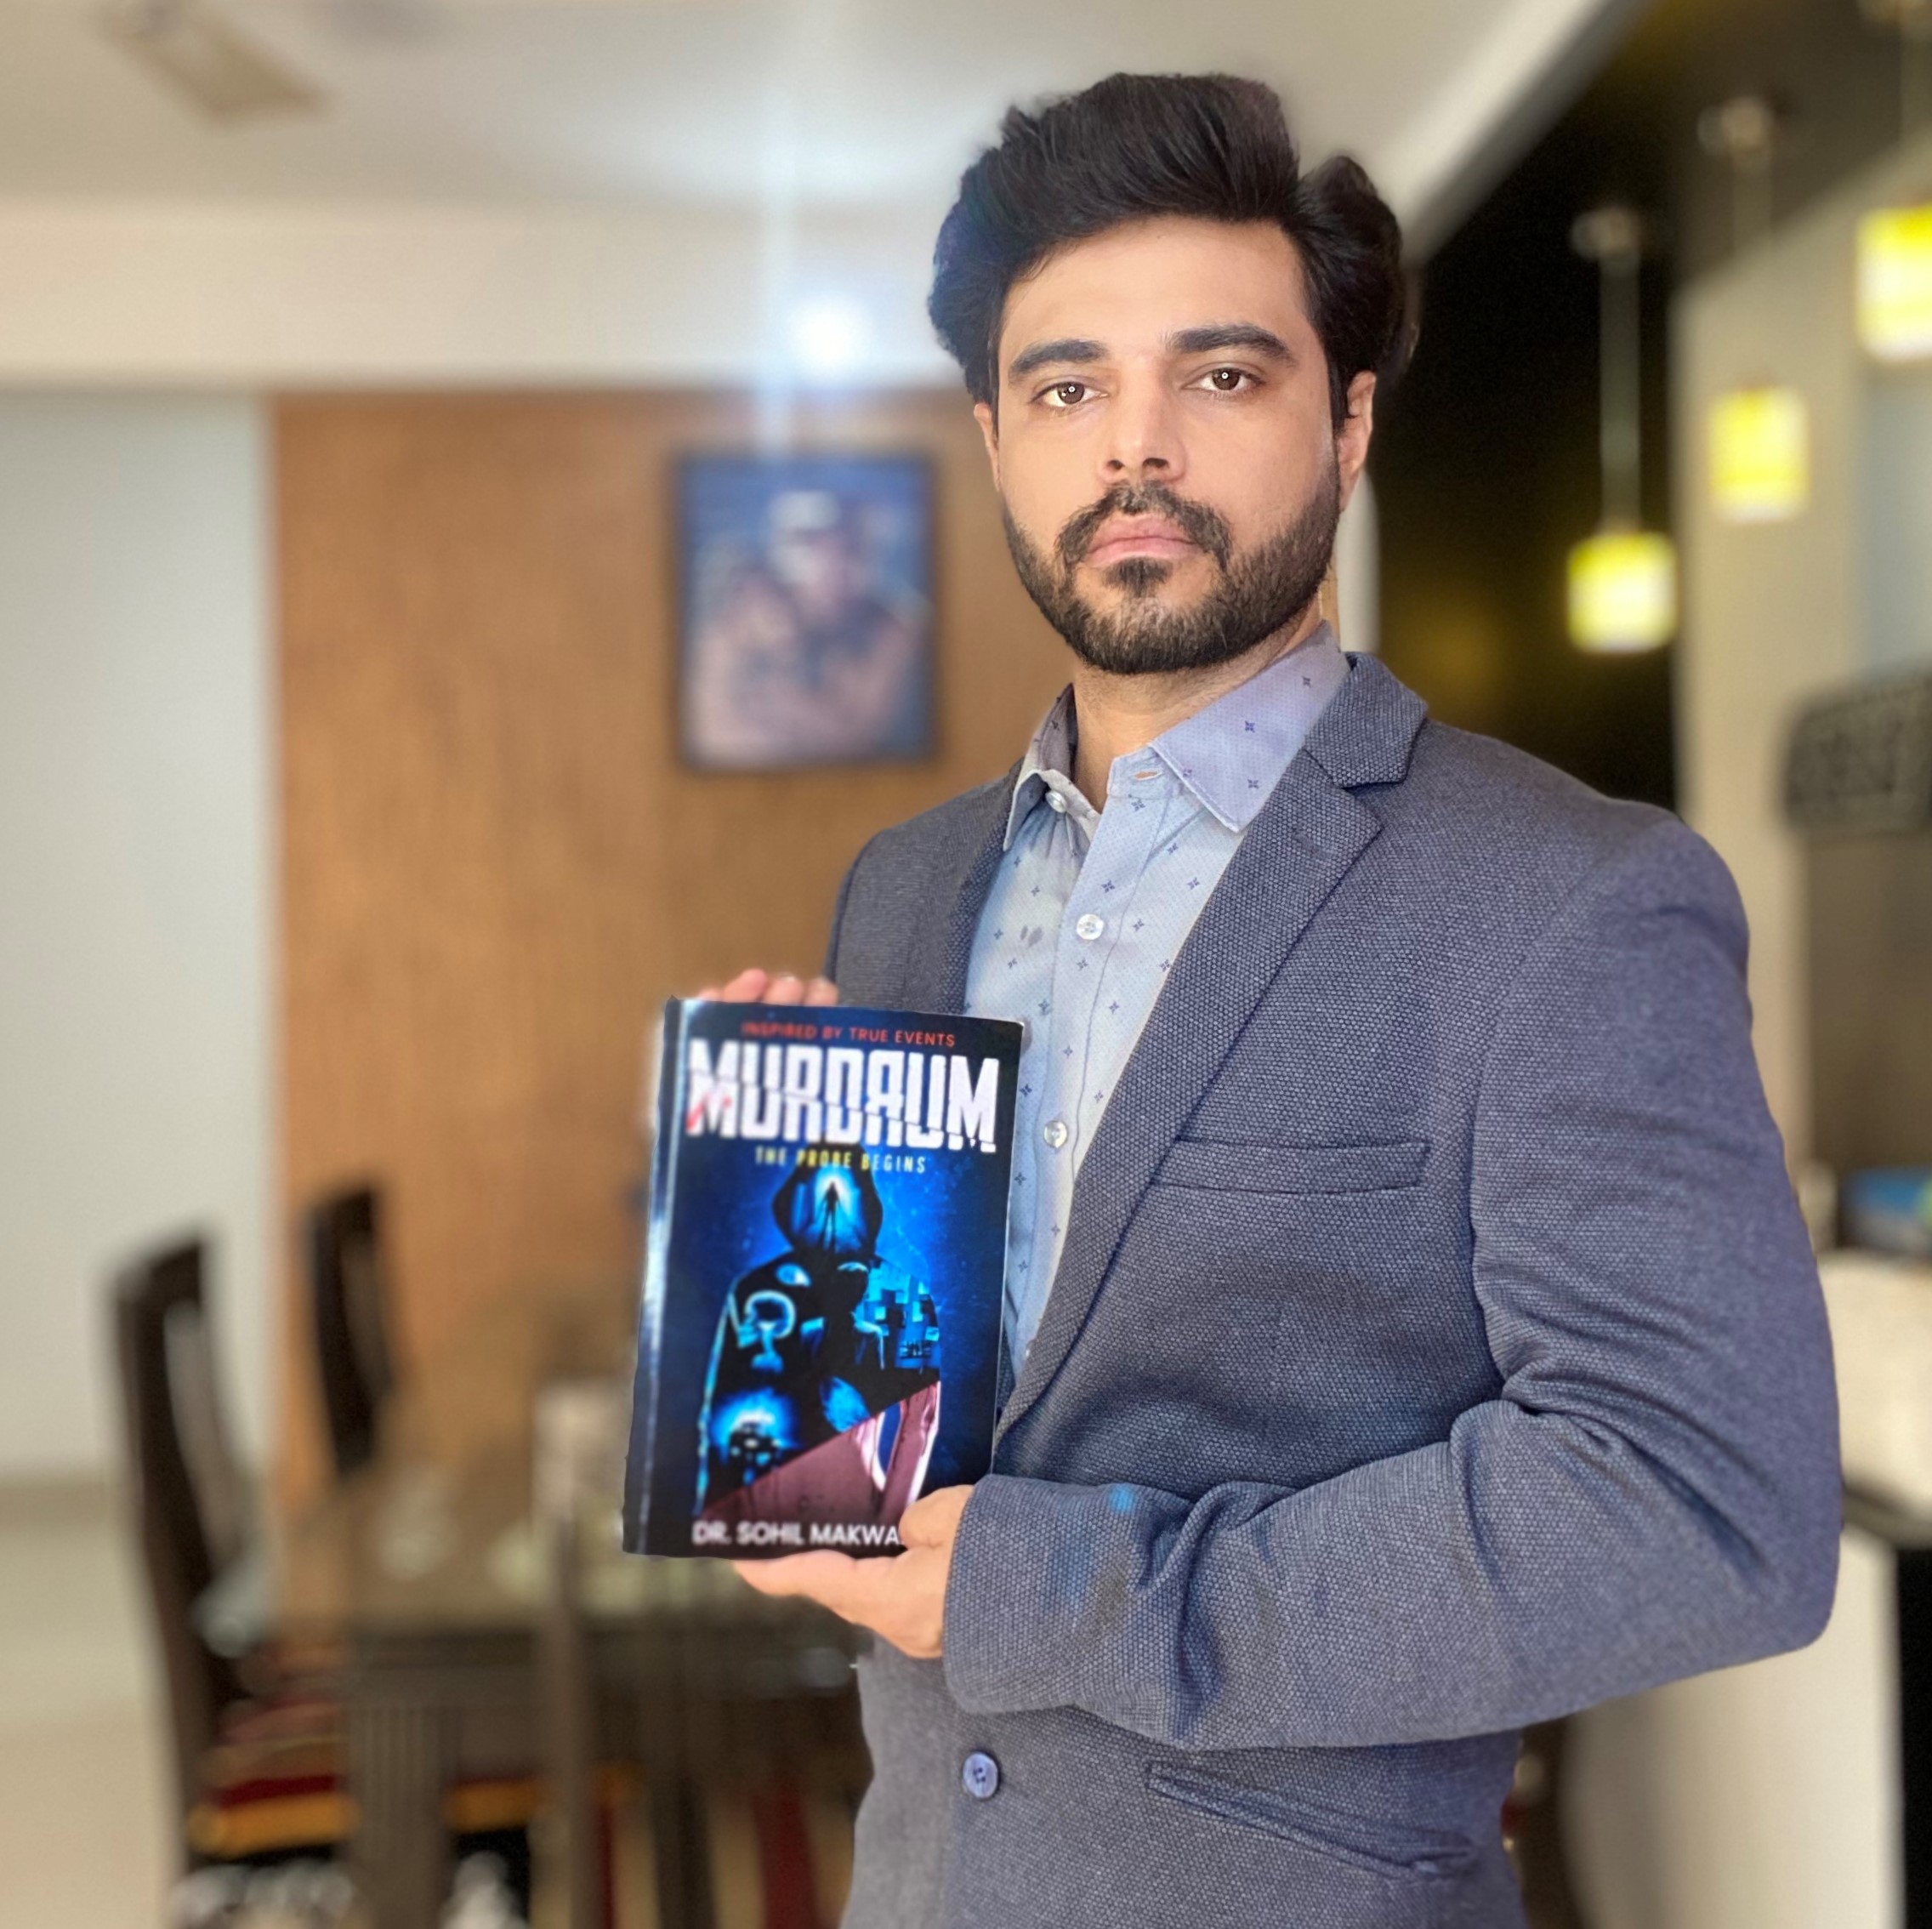 I have new stories because I know how to blend the art of science and the science of art logically,” says Dr. Sohil Makwana, Author – ‘Murdrum: The Probe Begins,’ who loves writing medical fictions and bio-punks, in talks with INN